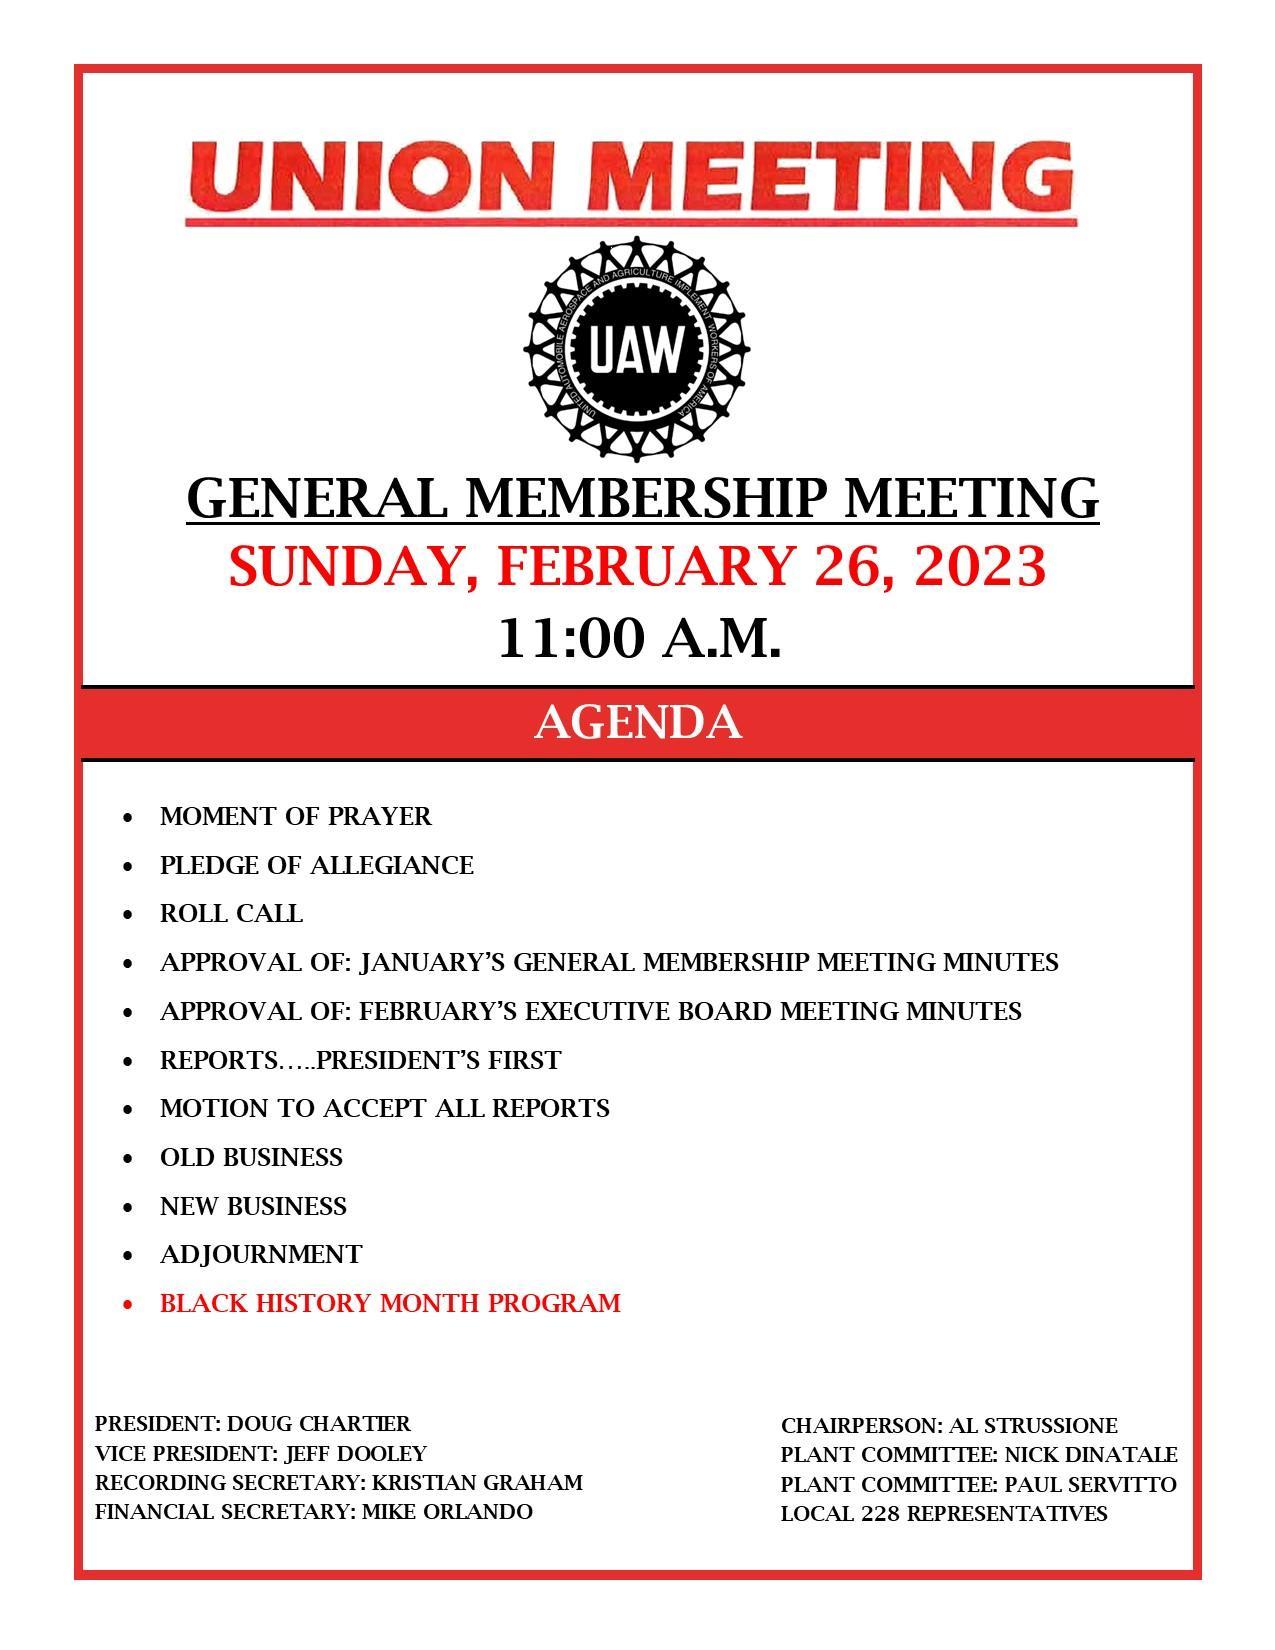 Union Meeting February 26, 2023 at 11:00am 